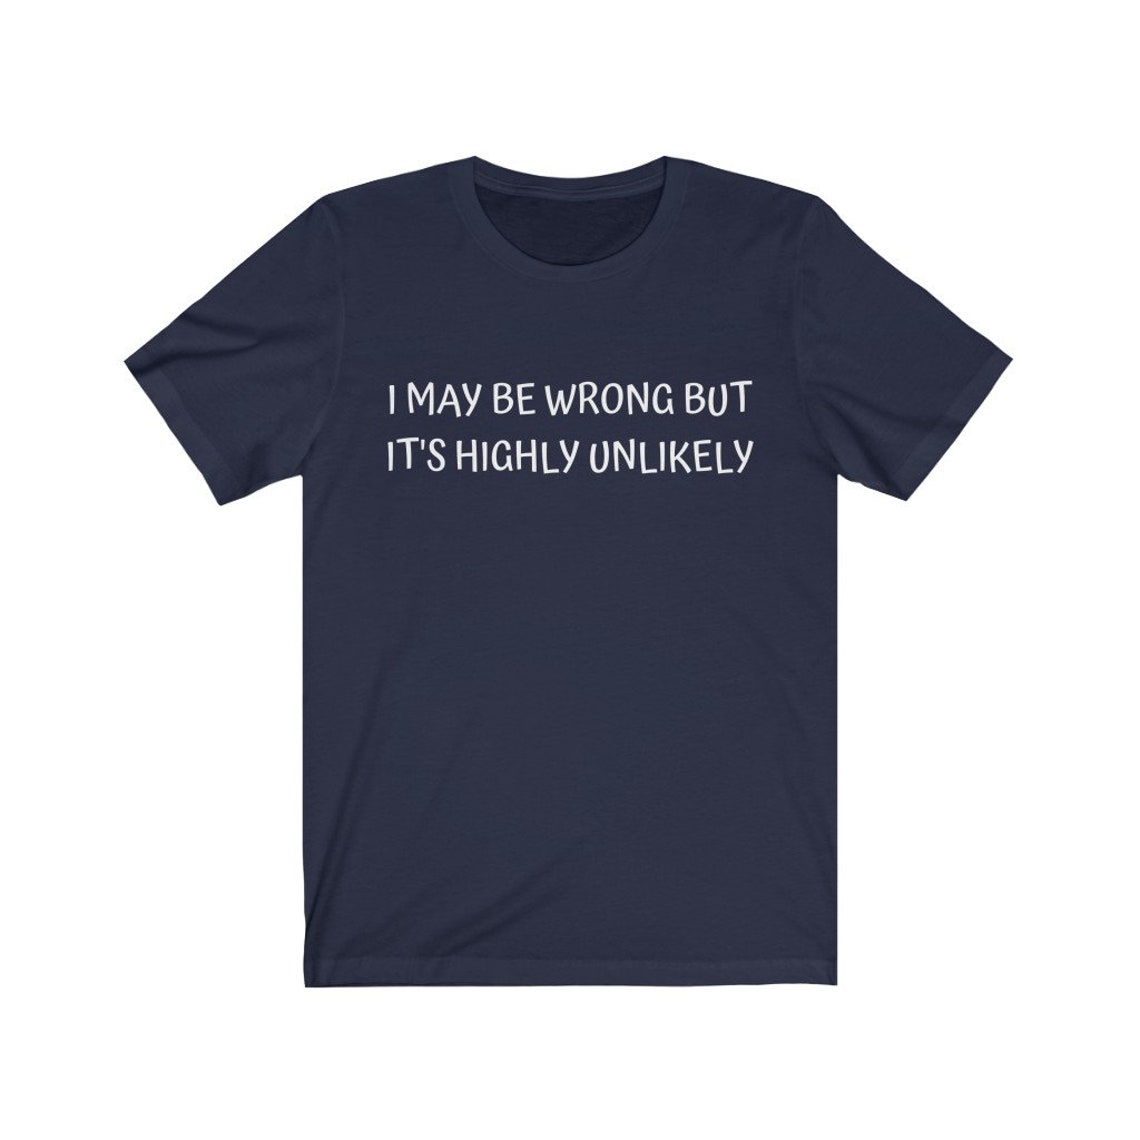 I May Be Wrong But It's Highly Unlikely Funny T-shirt | Etsy